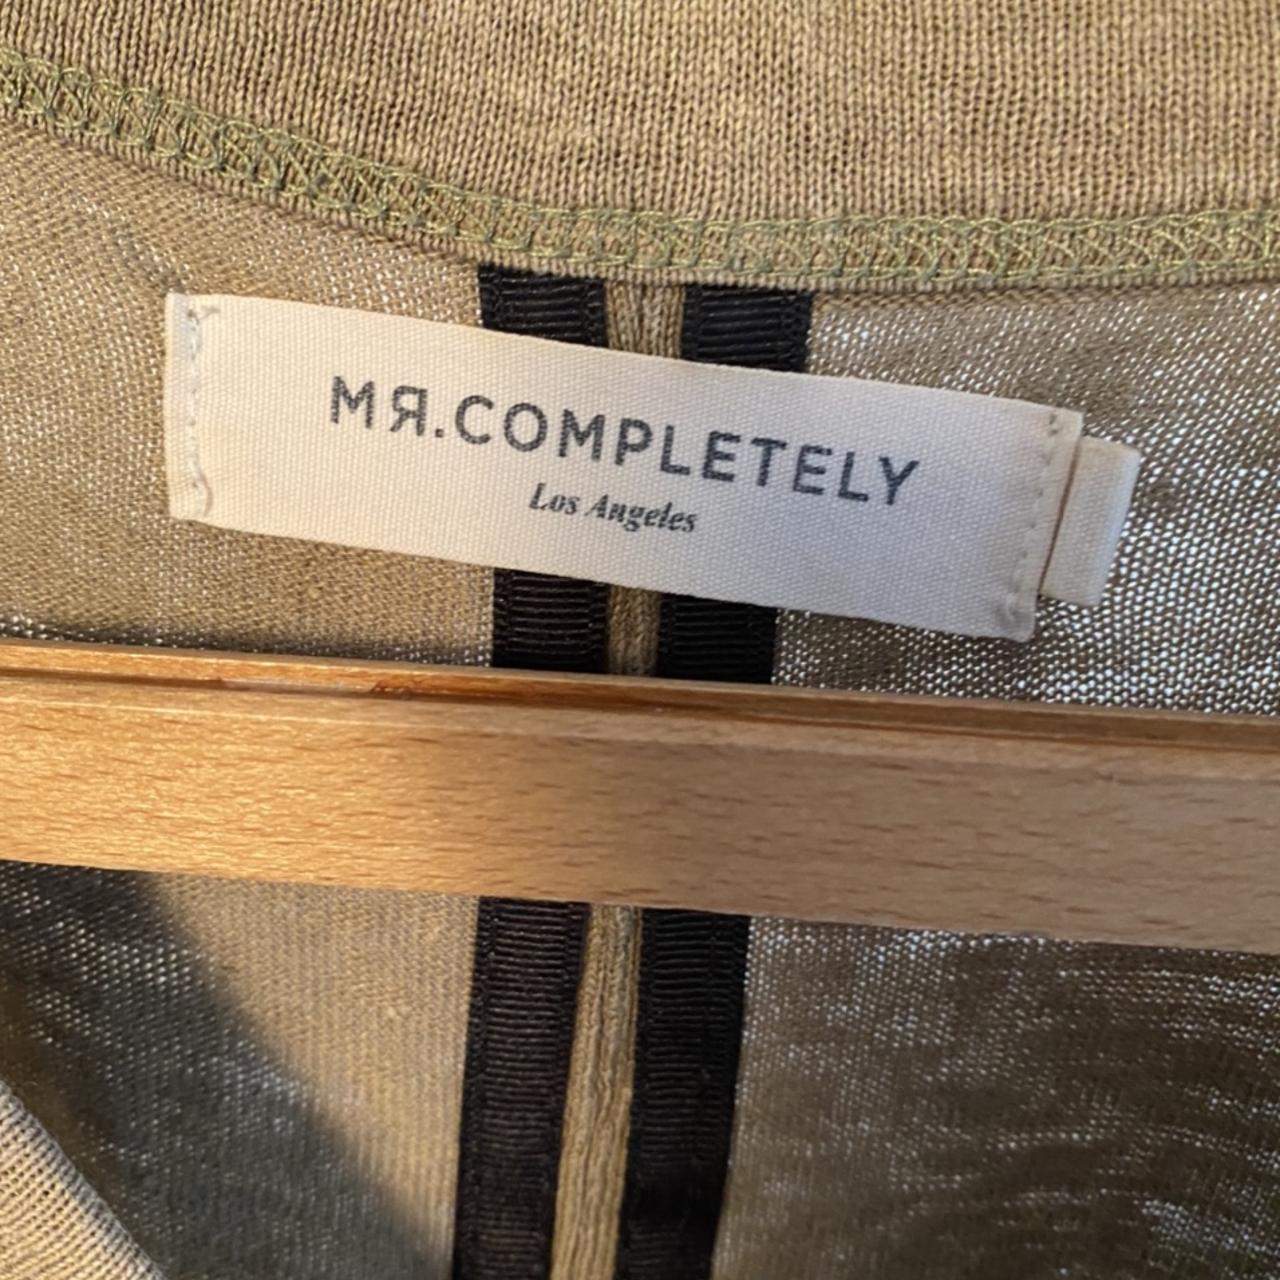 Product Image 3 - Mr completely T-shirt
Size L/XL
Great condition